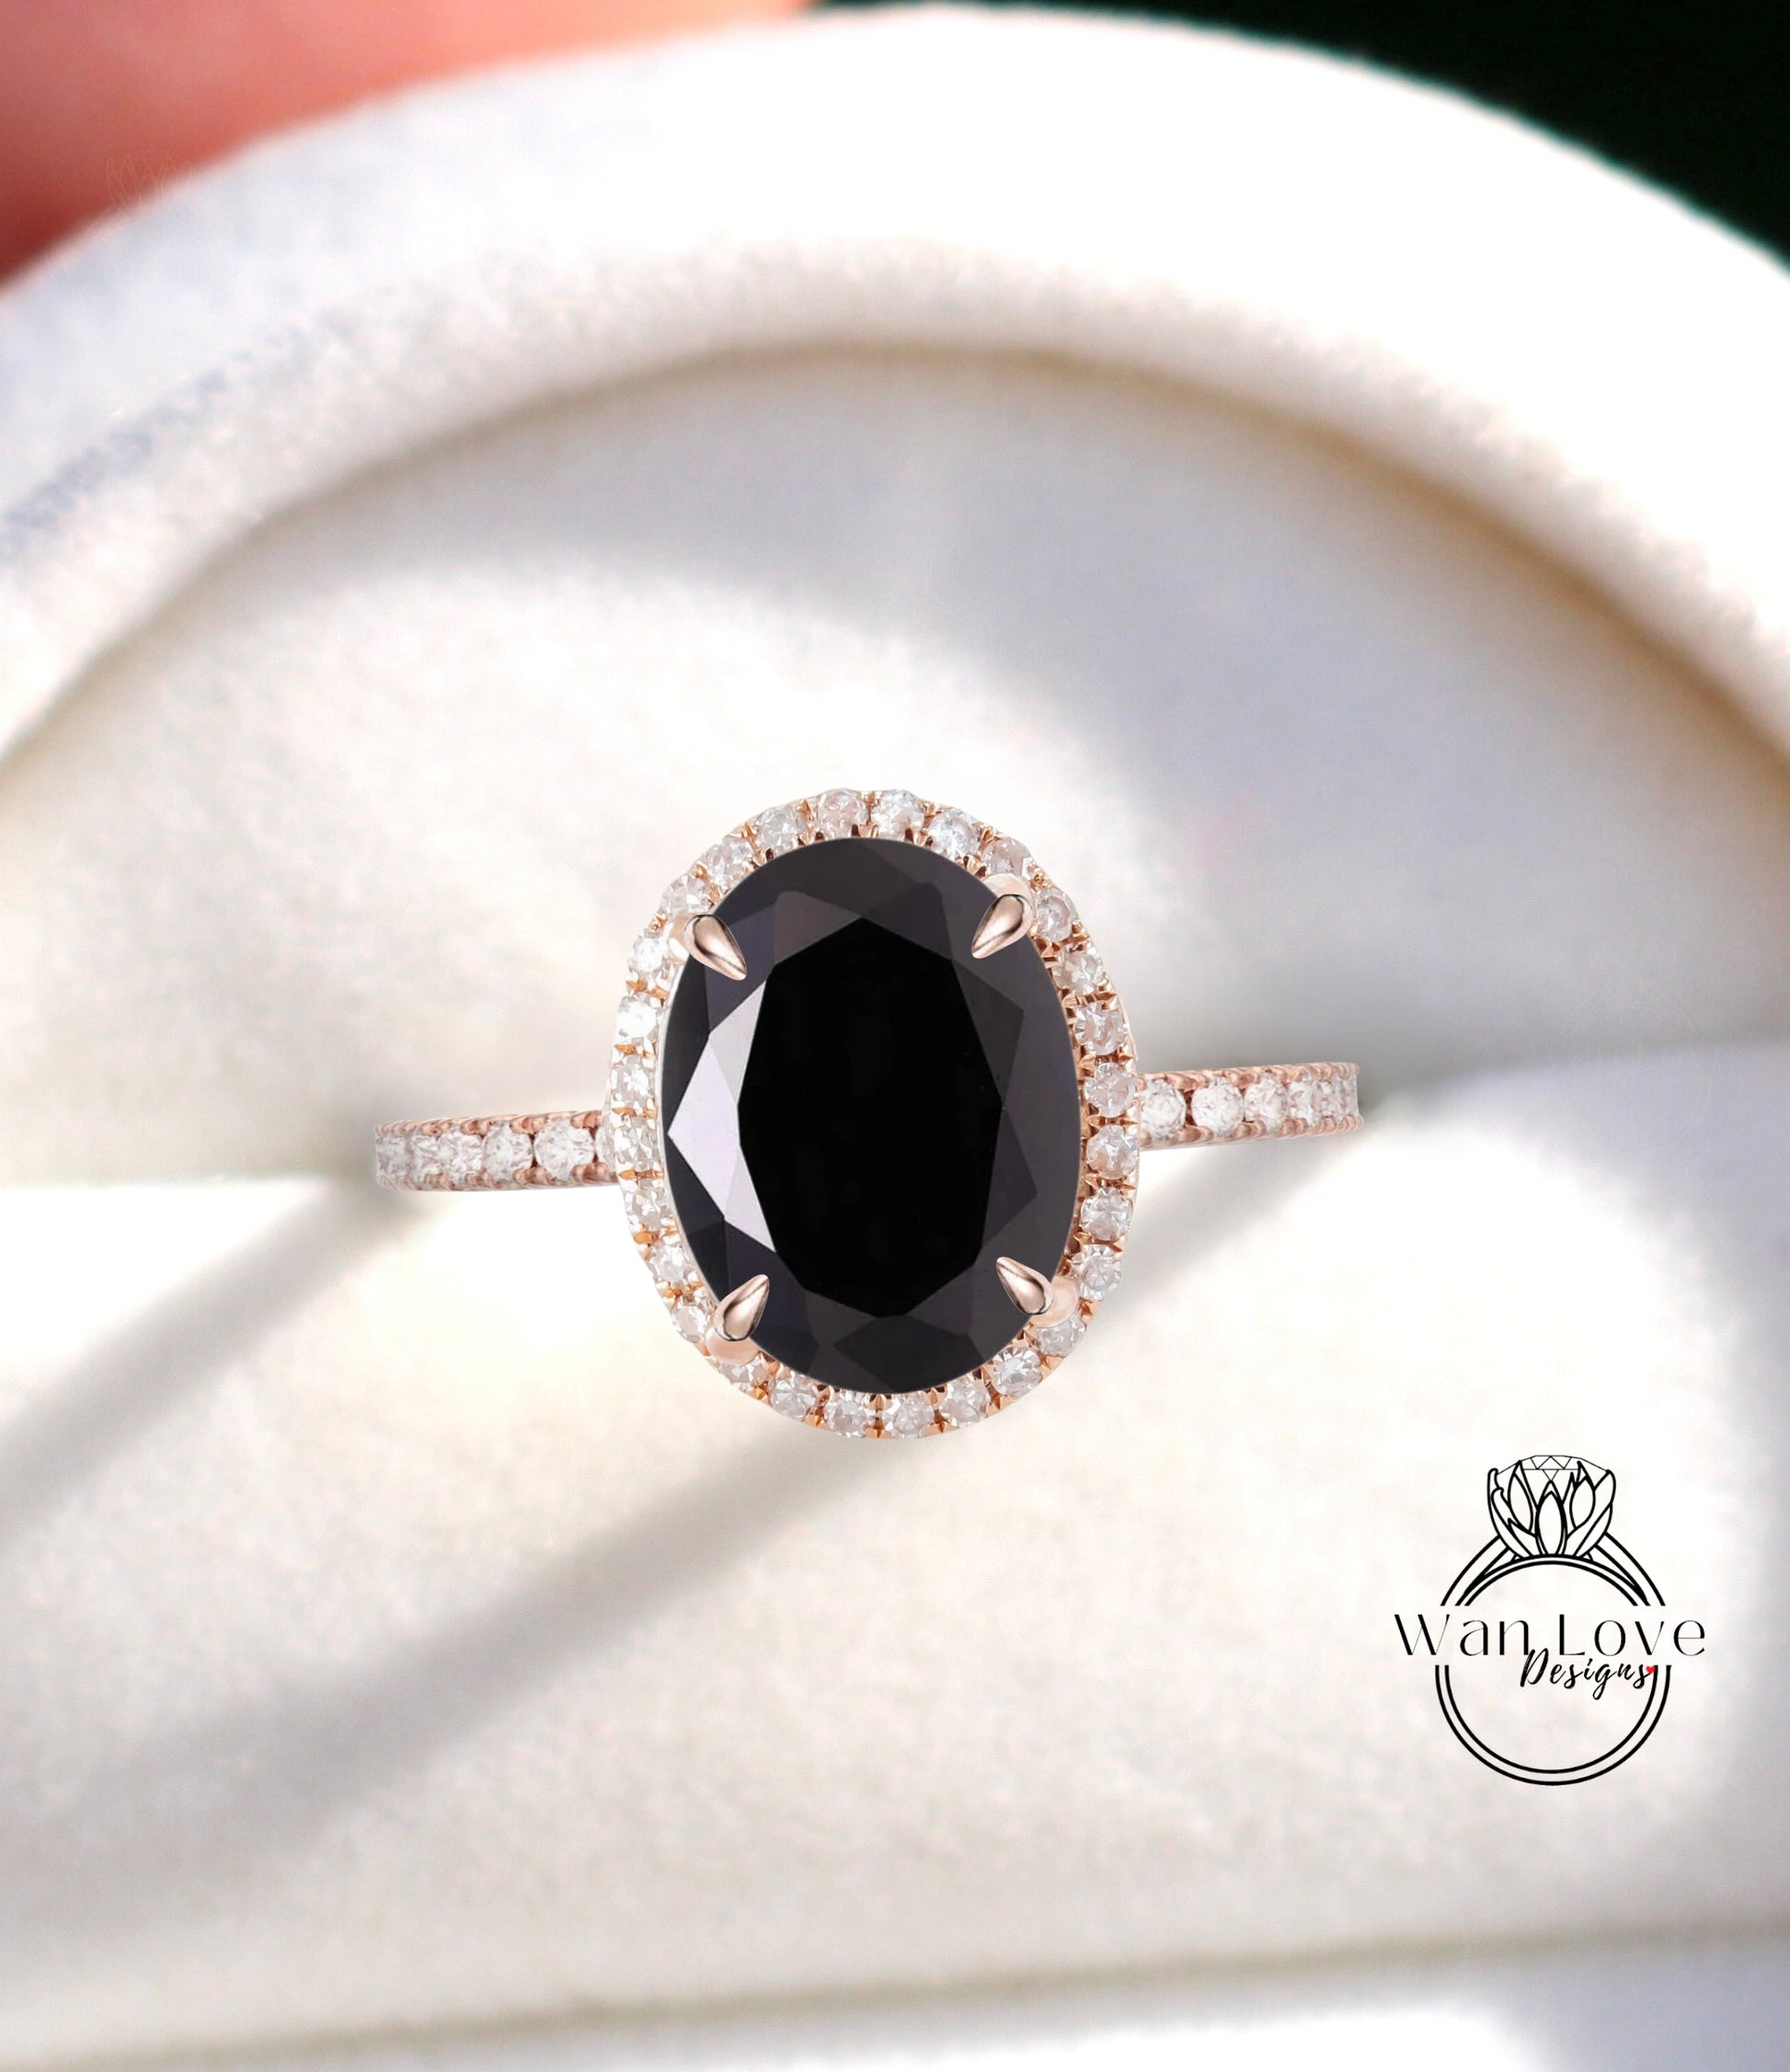 a close up of a ring with a black stone